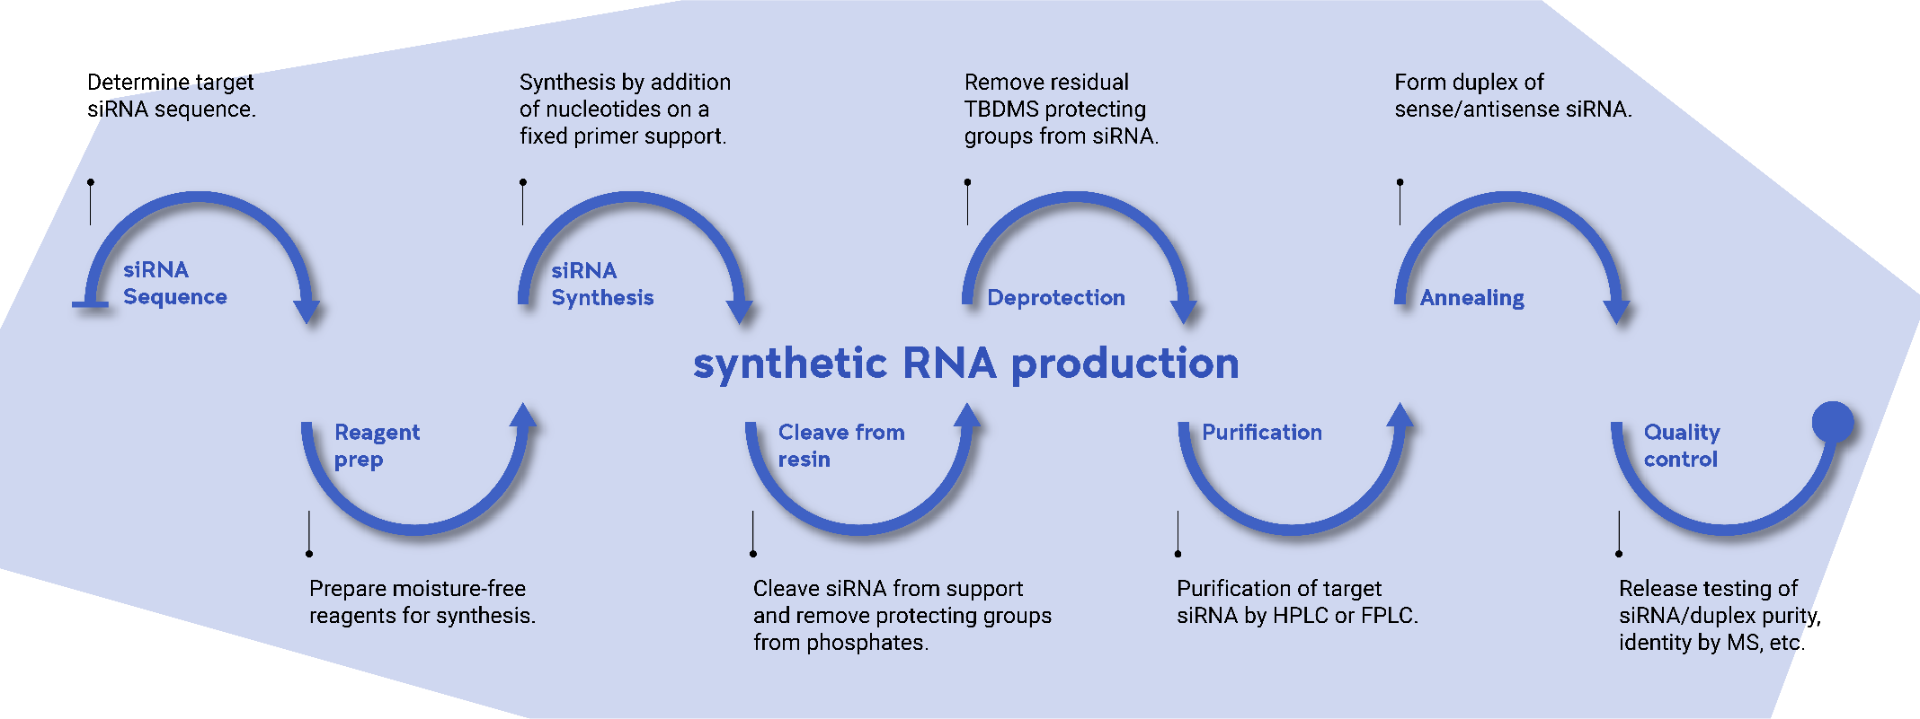 Synthentic RNA Production